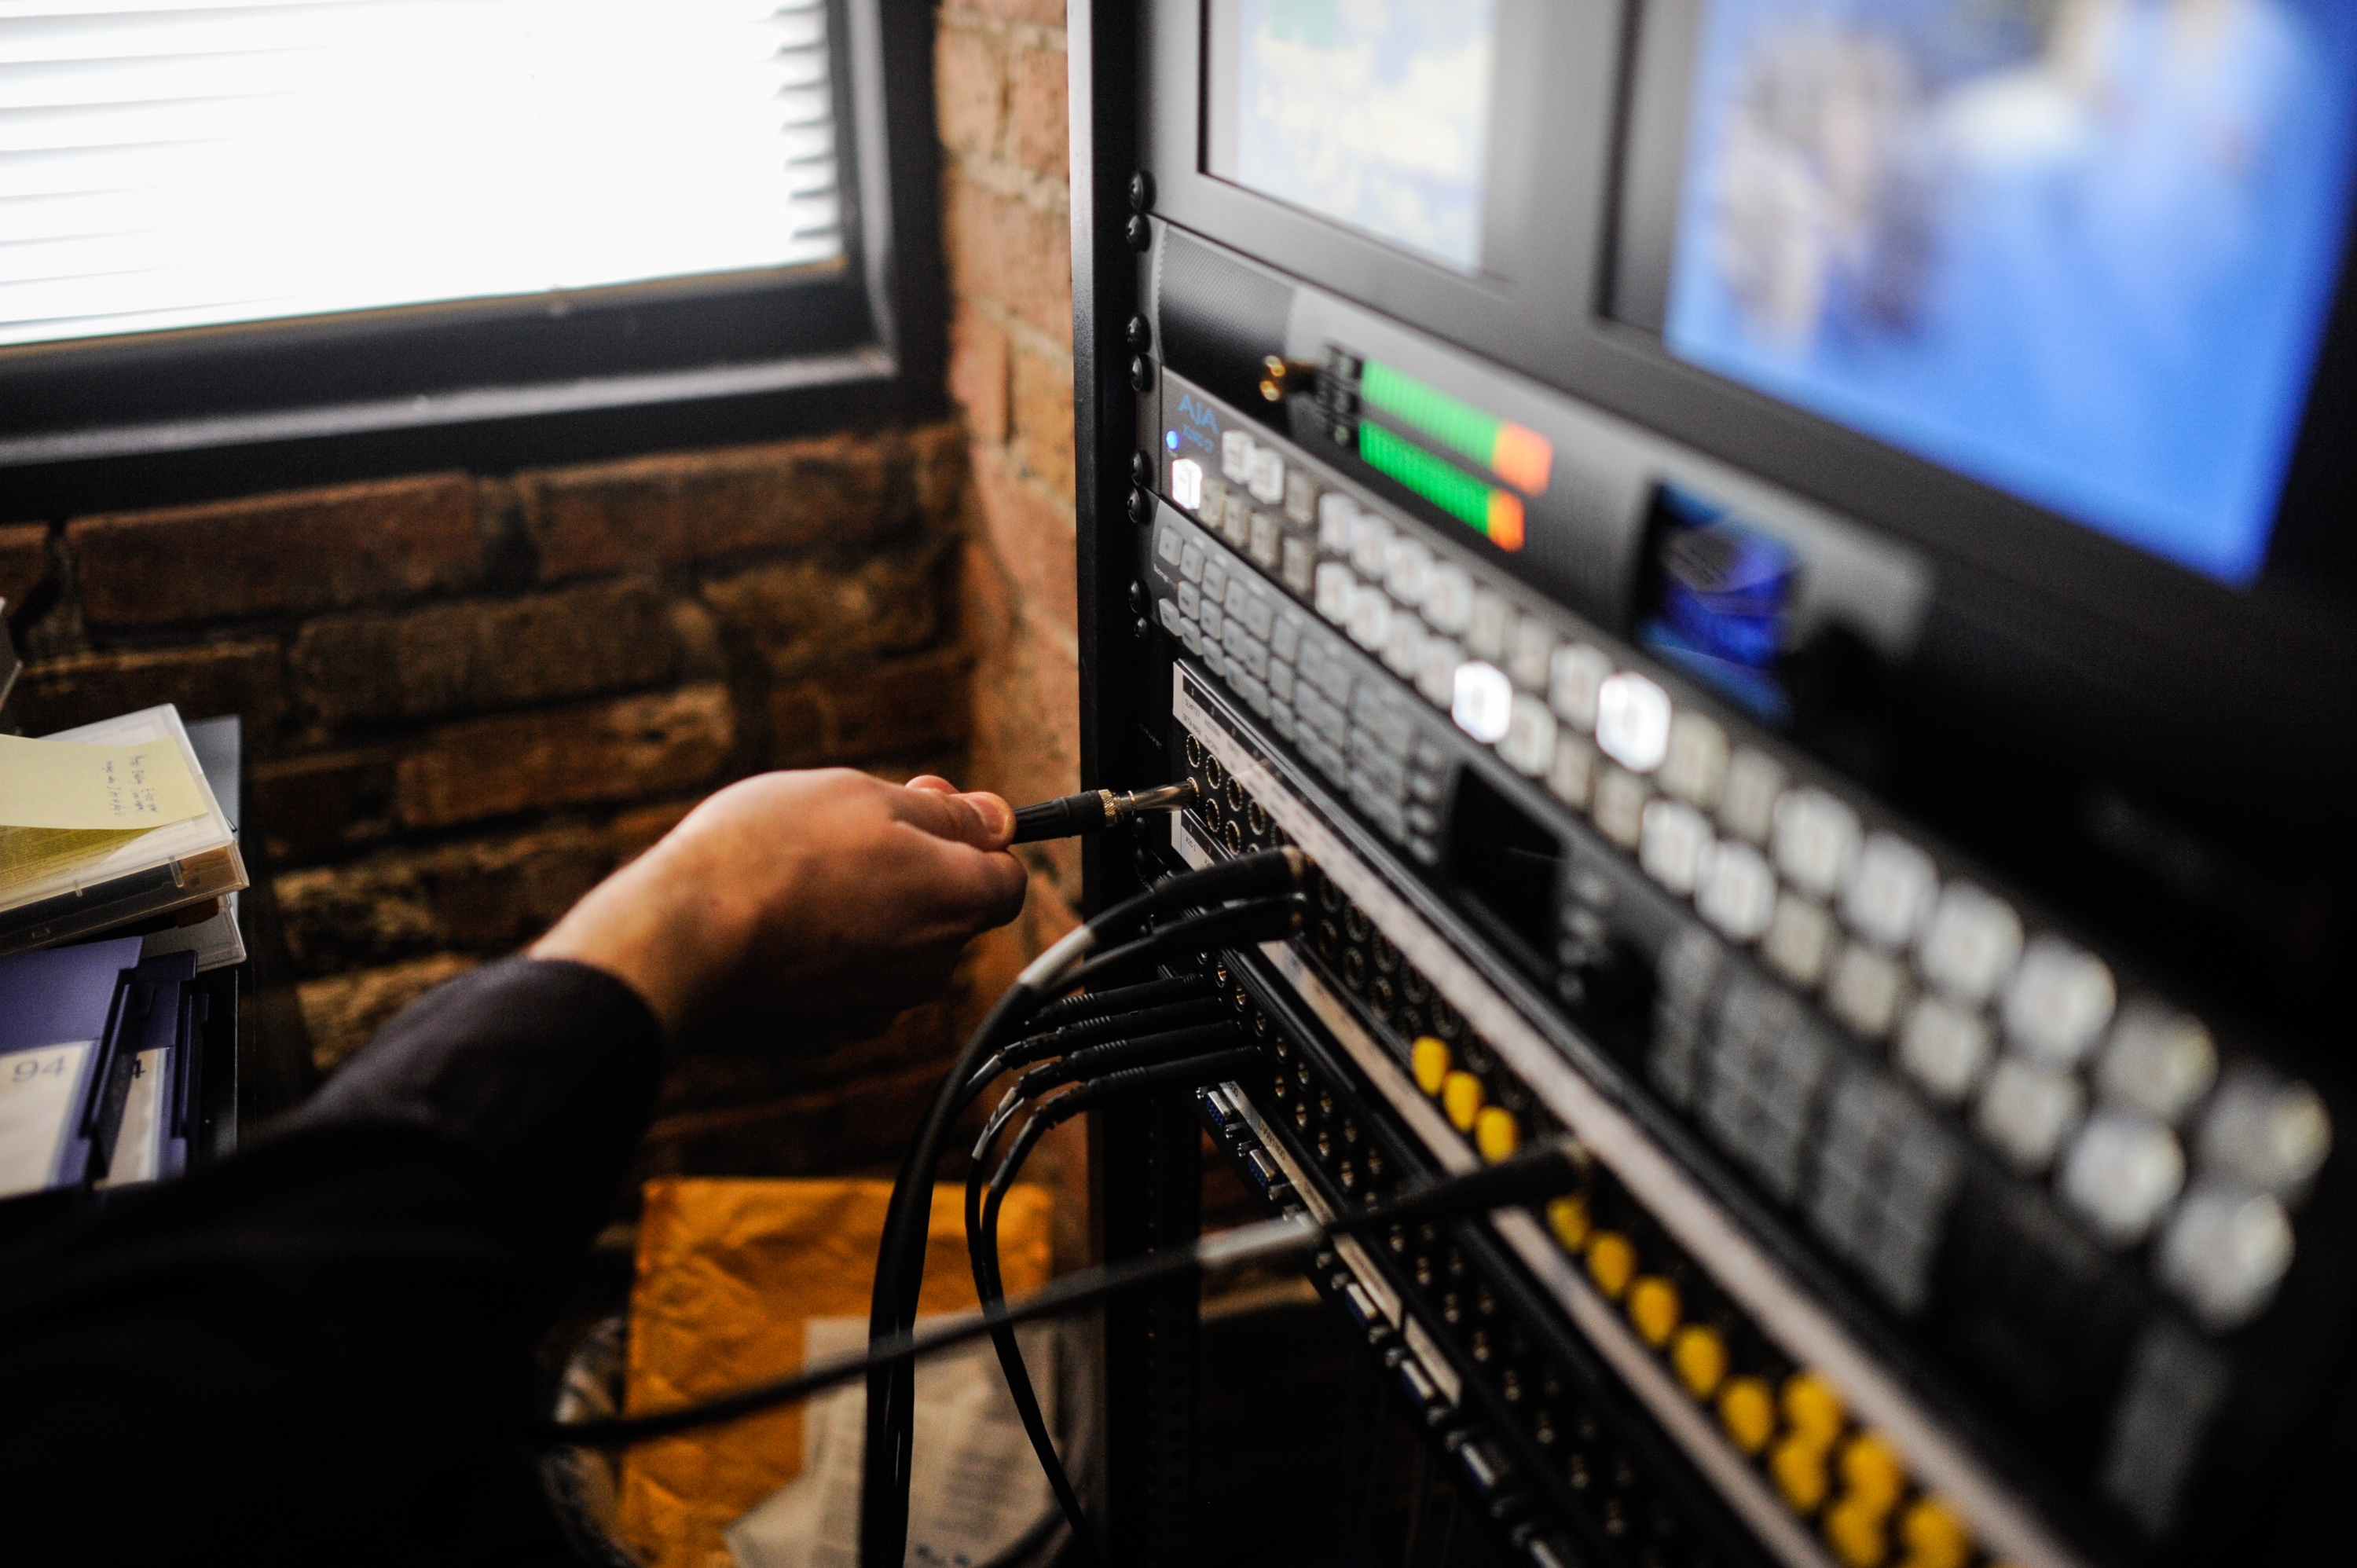 The image shows equipment at Media Burn archives. A hand plugs wire into the equipment below two screens. Photo by William Camargo.